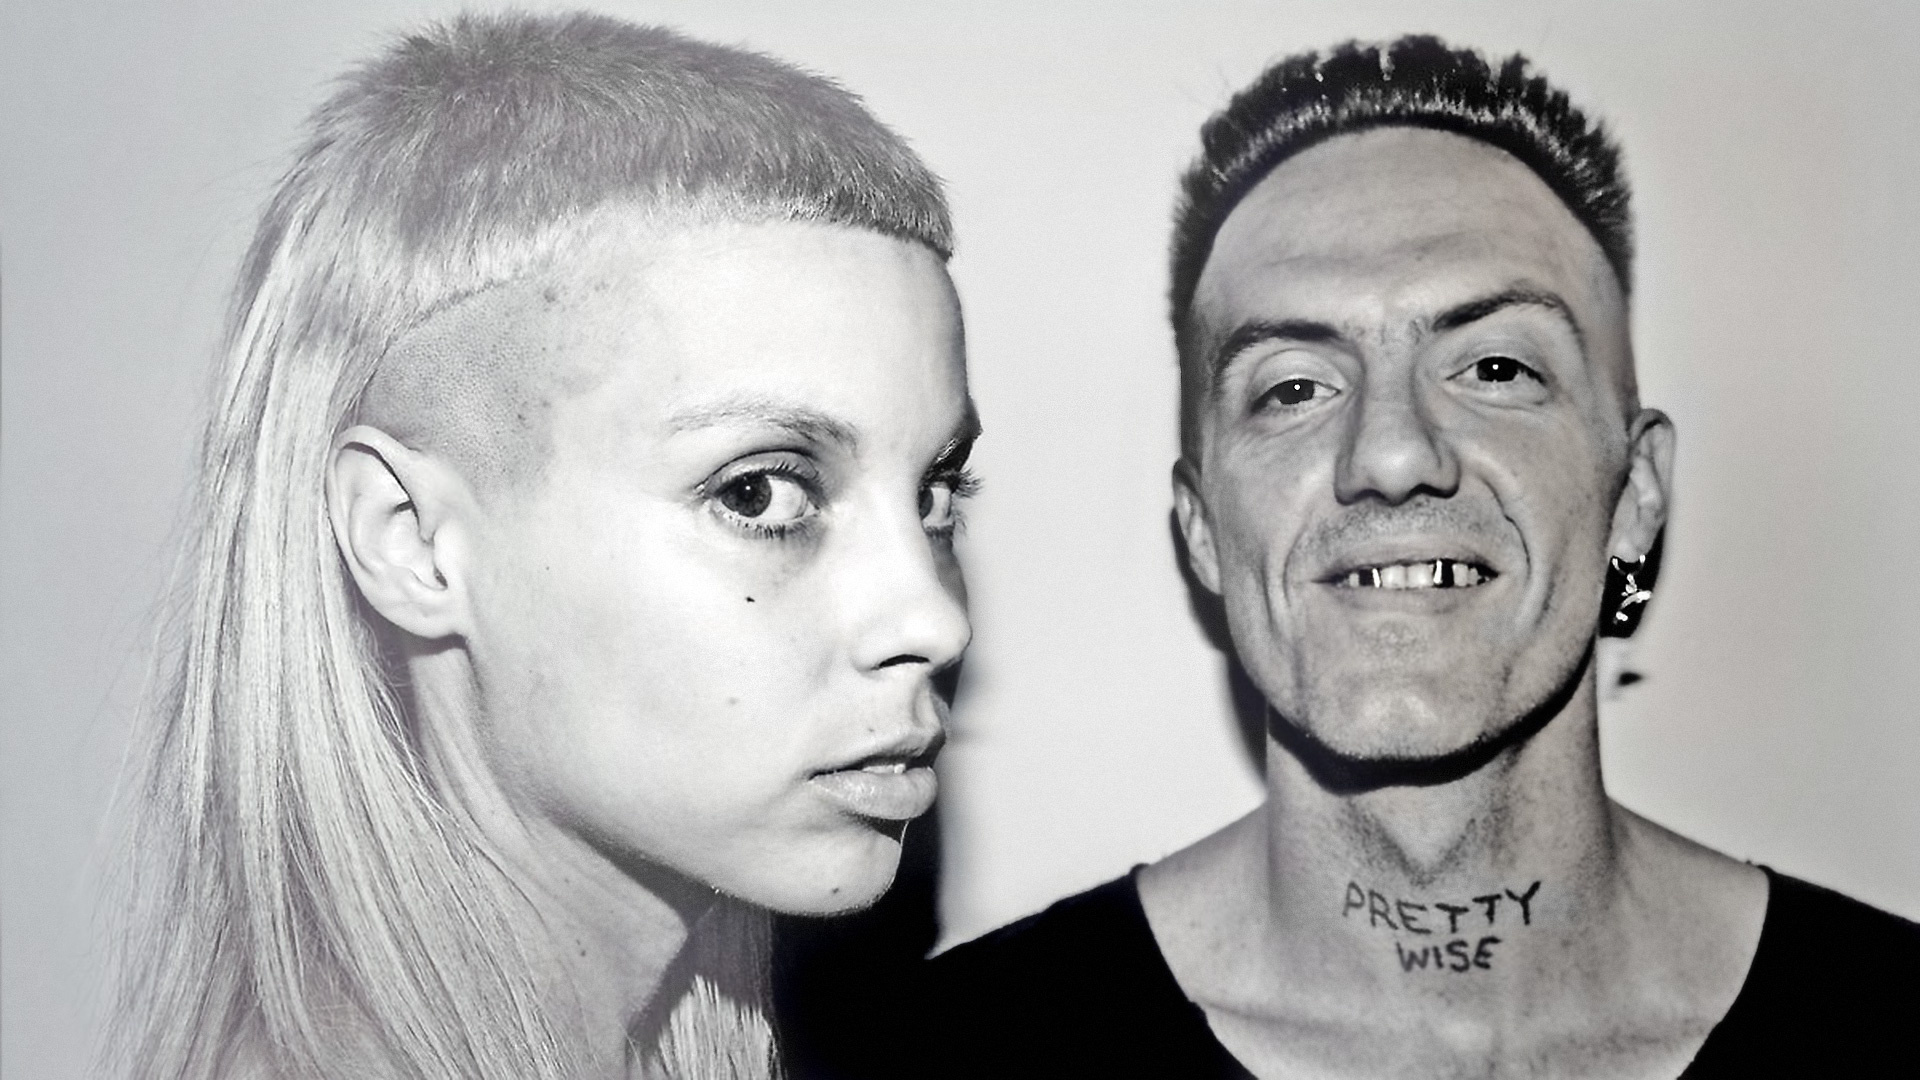 Die Antwoord: Based their brand on imitating the so-called Zef lifestyle and culture of poor white suburbs like Vrededorp, and the numbers gangs of the Cape Flats. 1920x1080 Full HD Wallpaper.